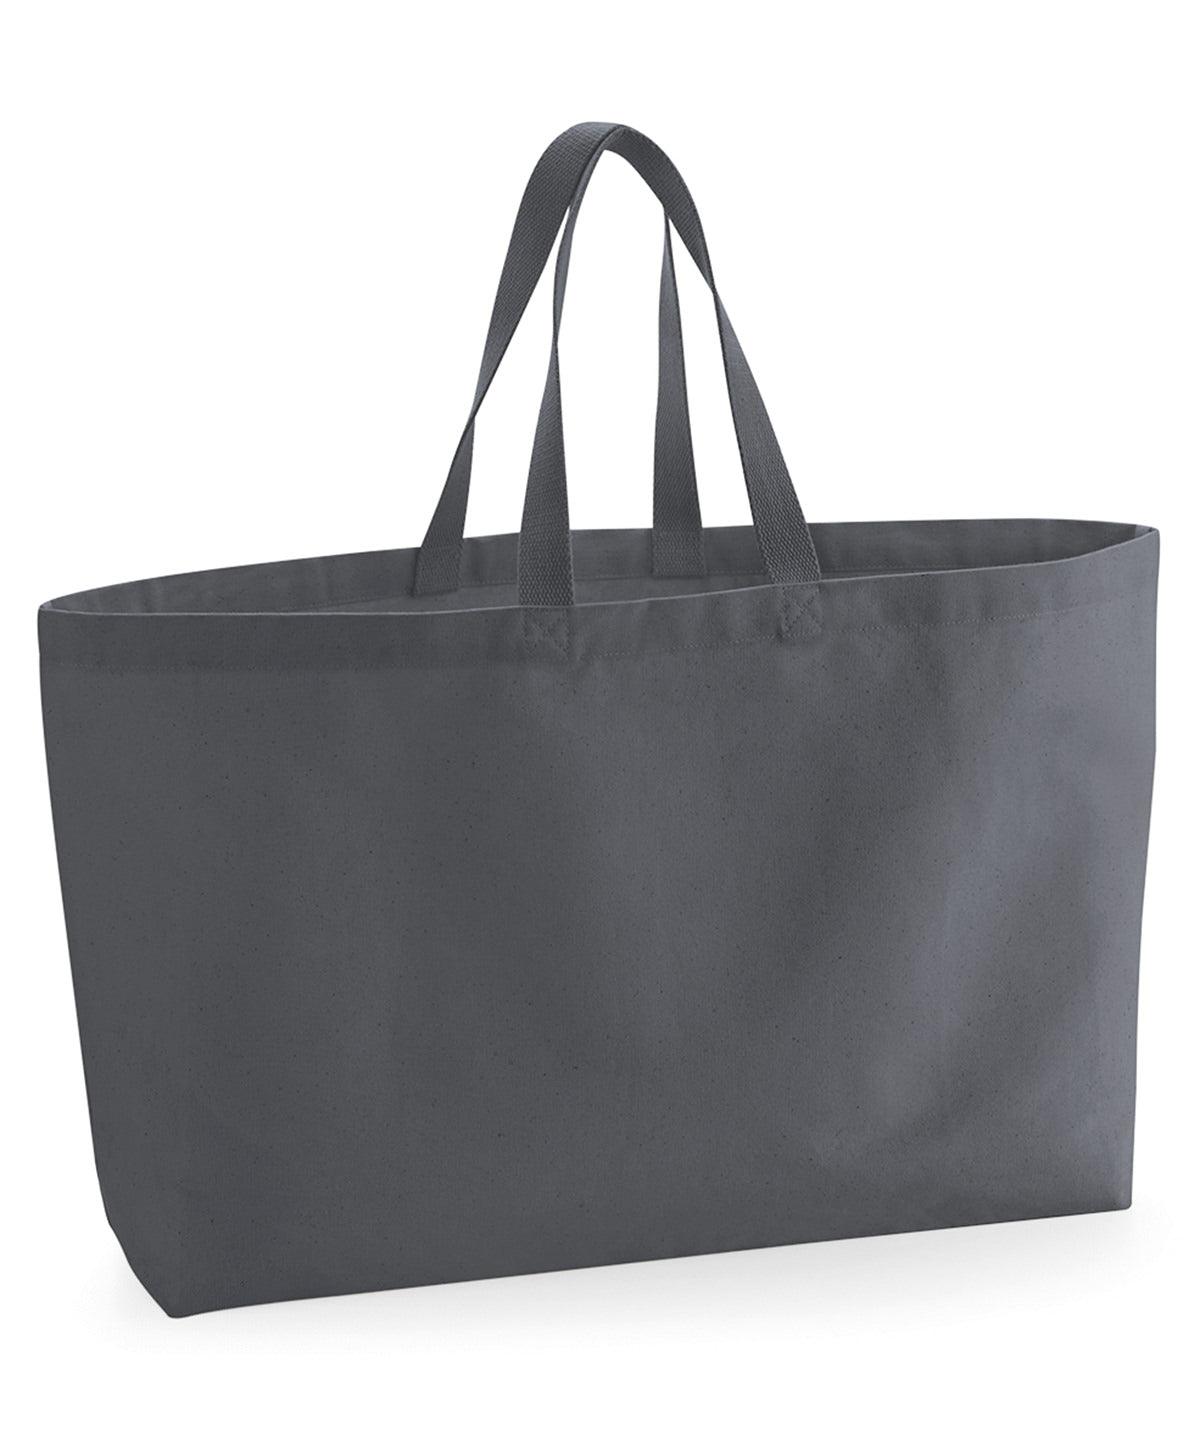 Graphite Grey - Oversized canvas tote bag Bags Westford Mill Bags & Luggage, New Colours for 2023, New Styles For 2022, Oversized Schoolwear Centres